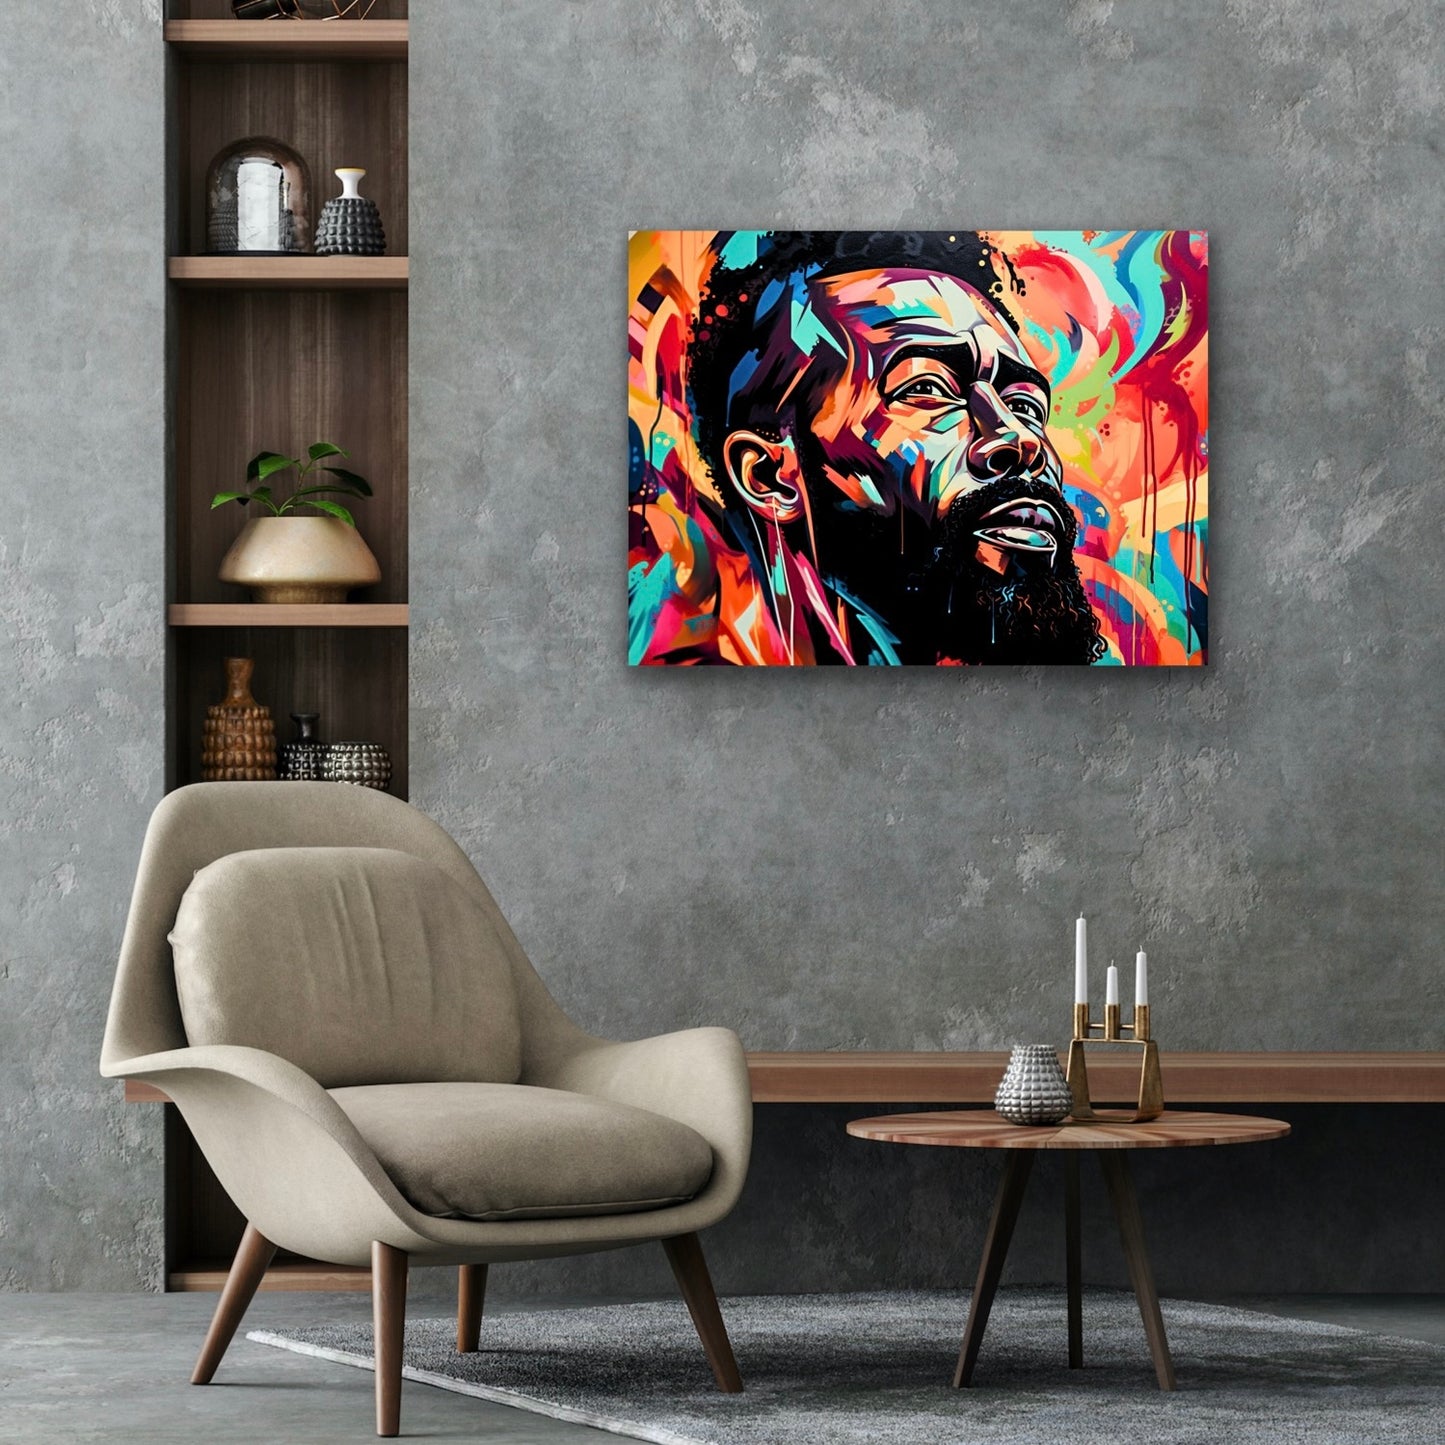 A Face of Color | Stretched Canvas Print Wall Art | Black Art | African American Art